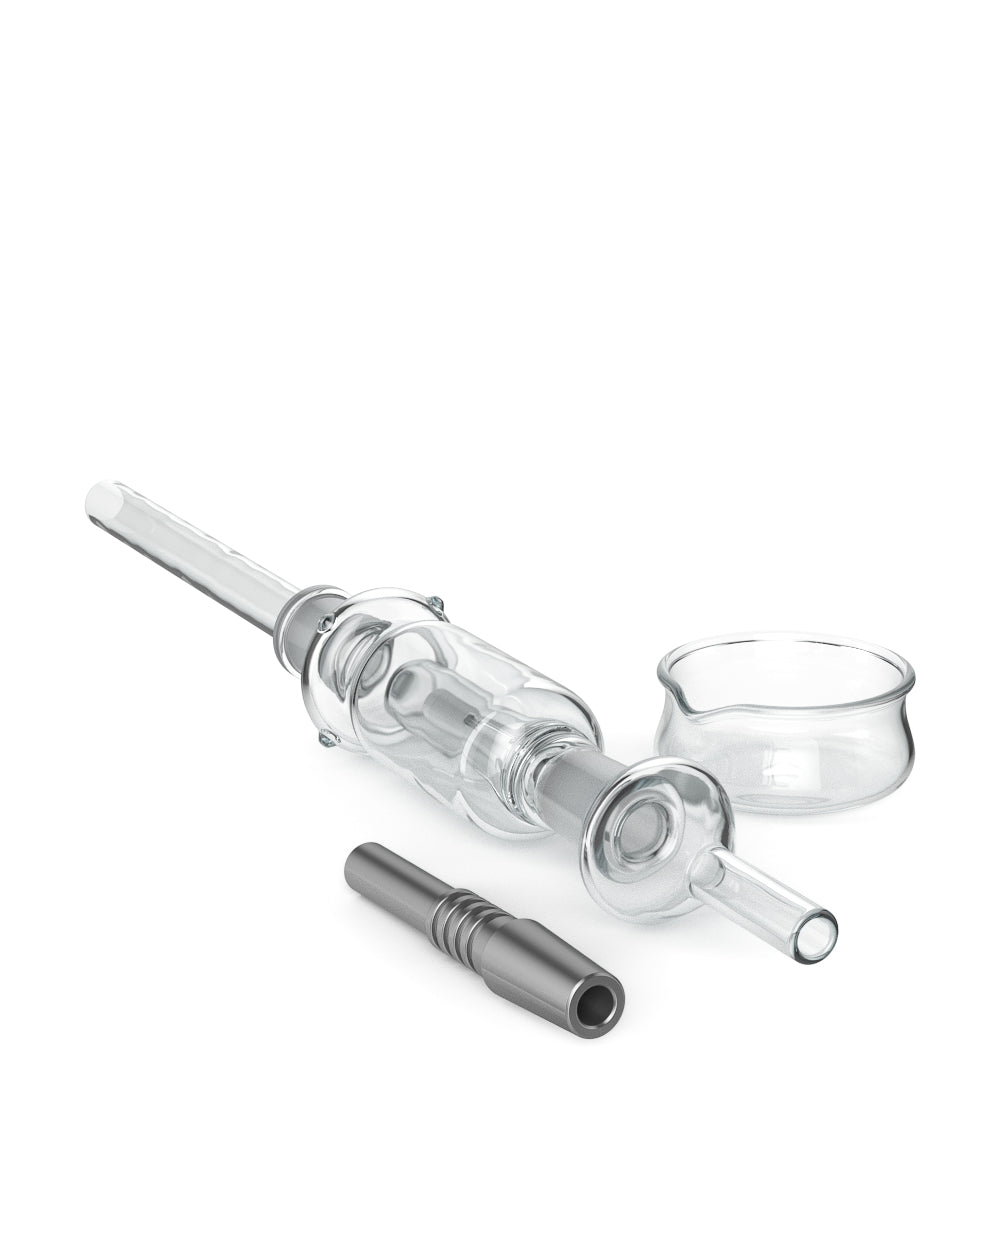 Nectar Collector Dab Pipe | 14in Long - 14mm Attachment - Clear - 7